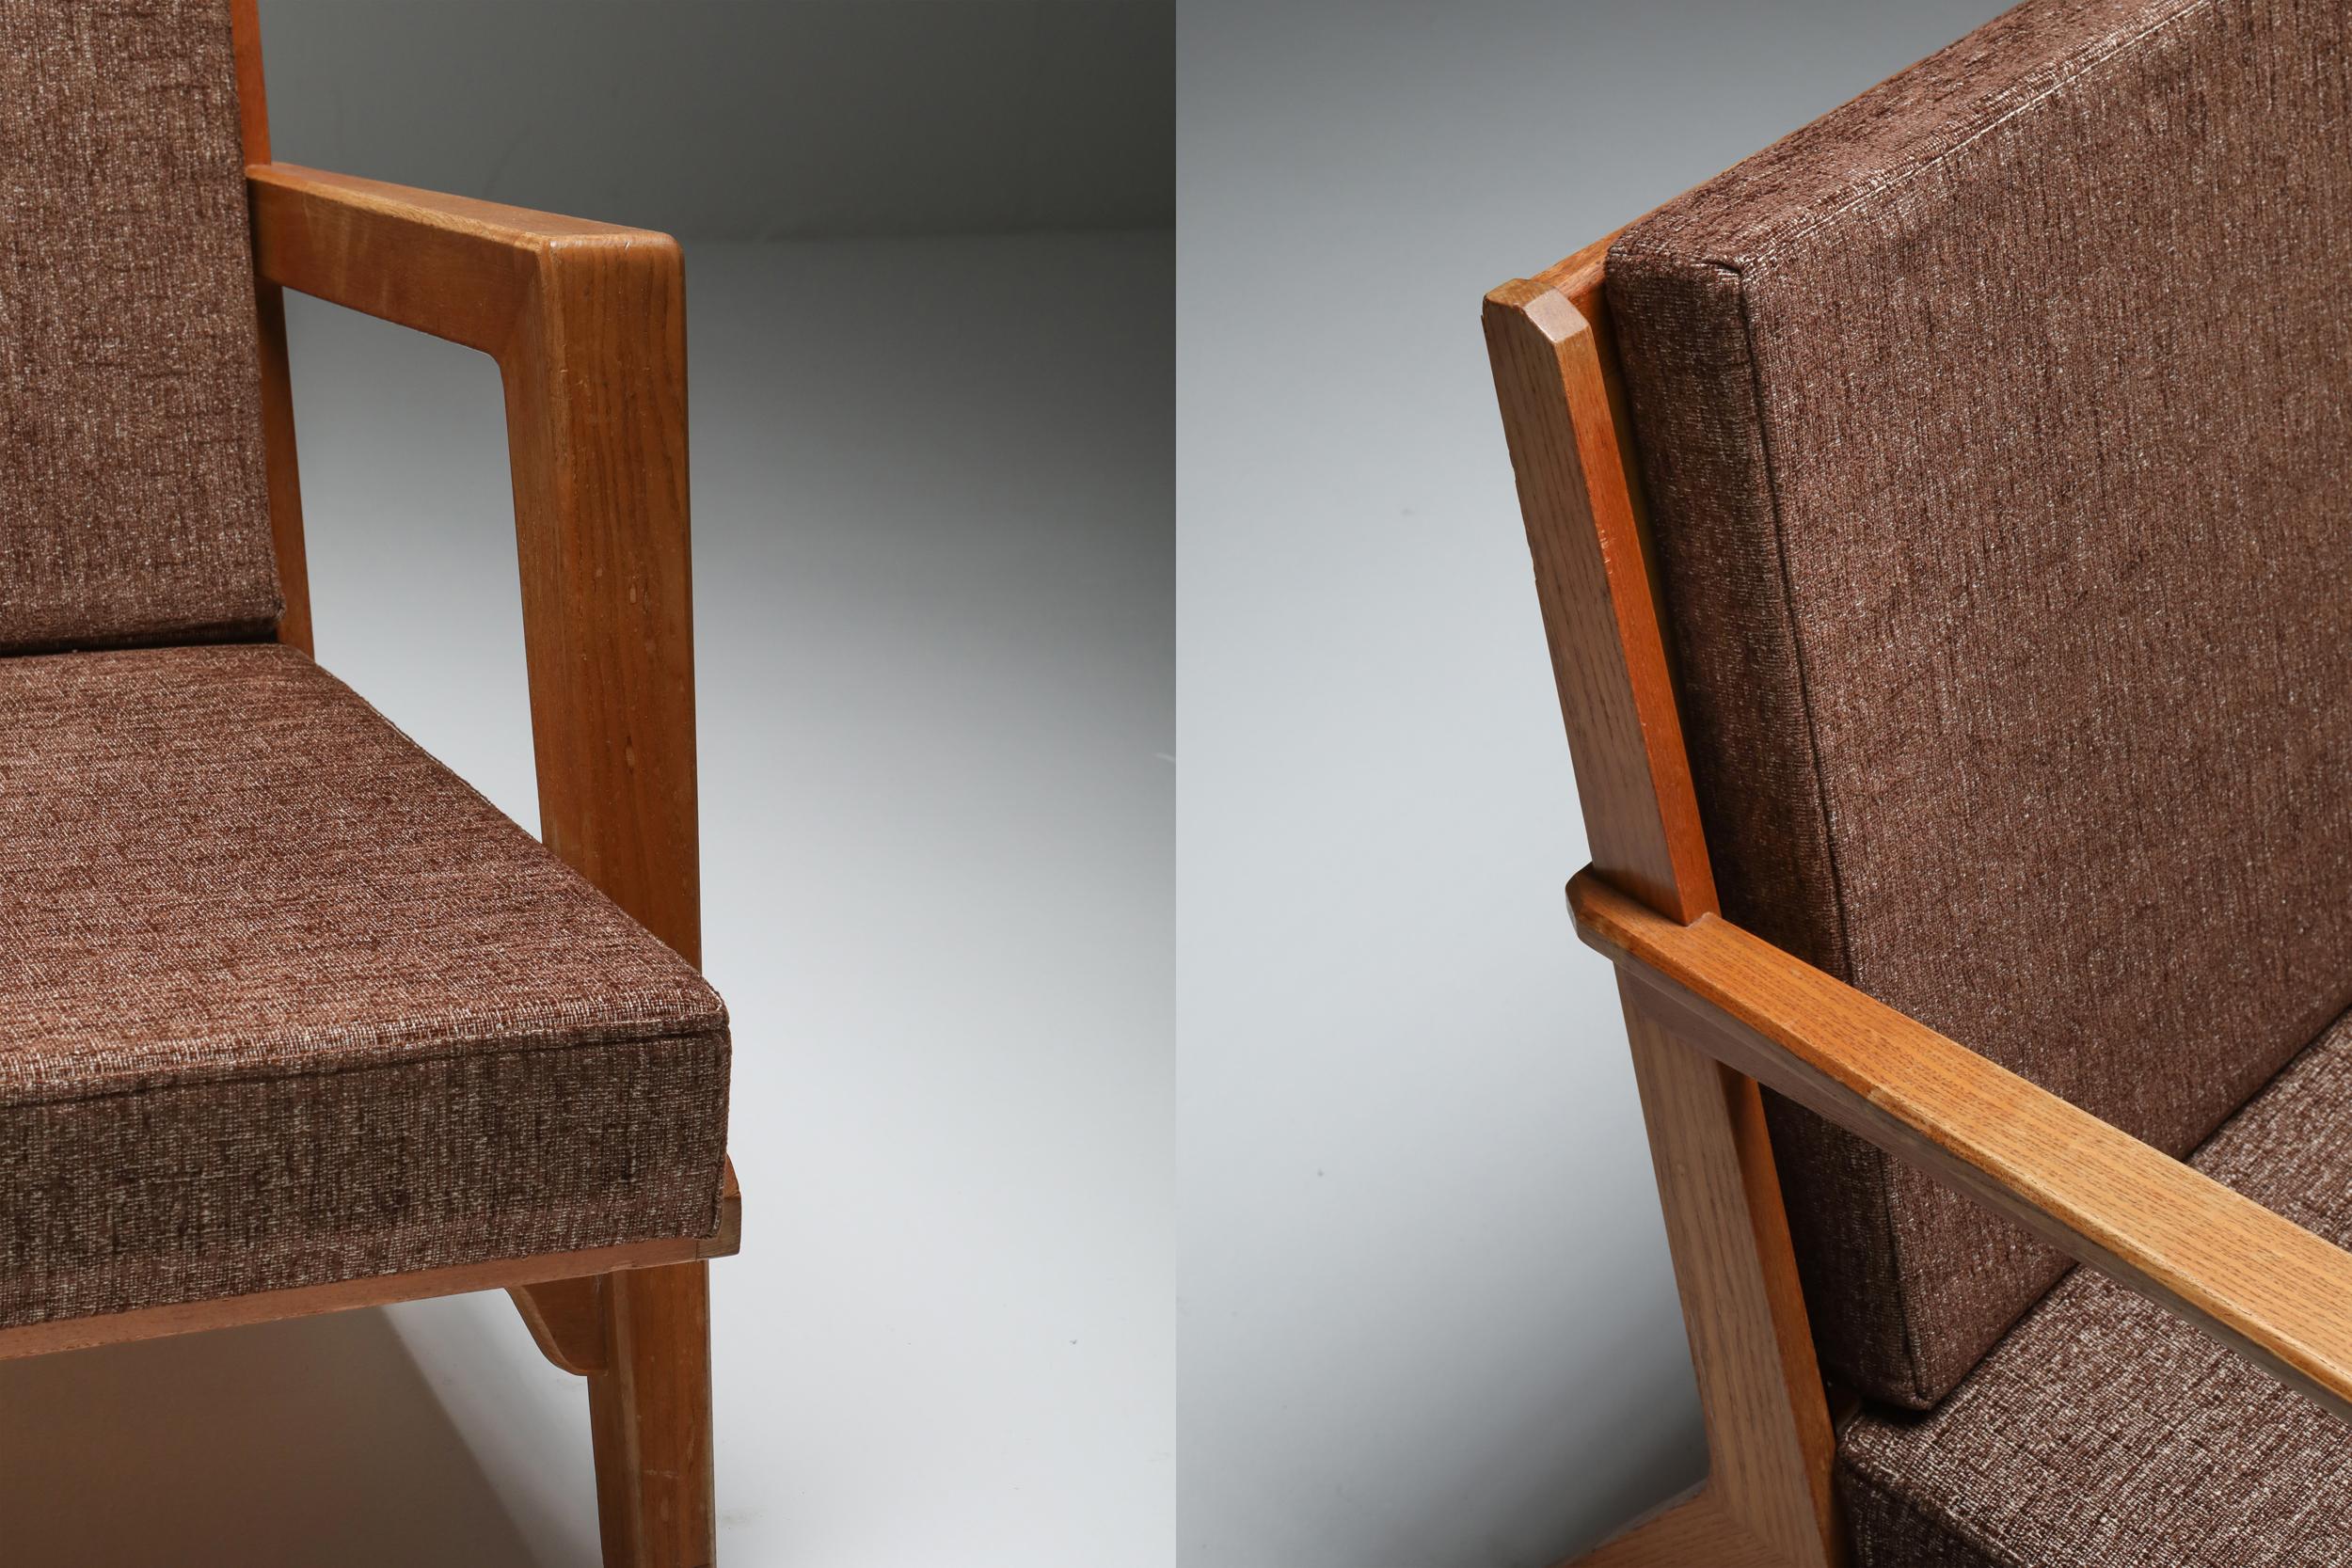 Mid-20th Century Pair of Modernist Easy chairs by Elmar Berkovich, Netherlands, 1950s For Sale